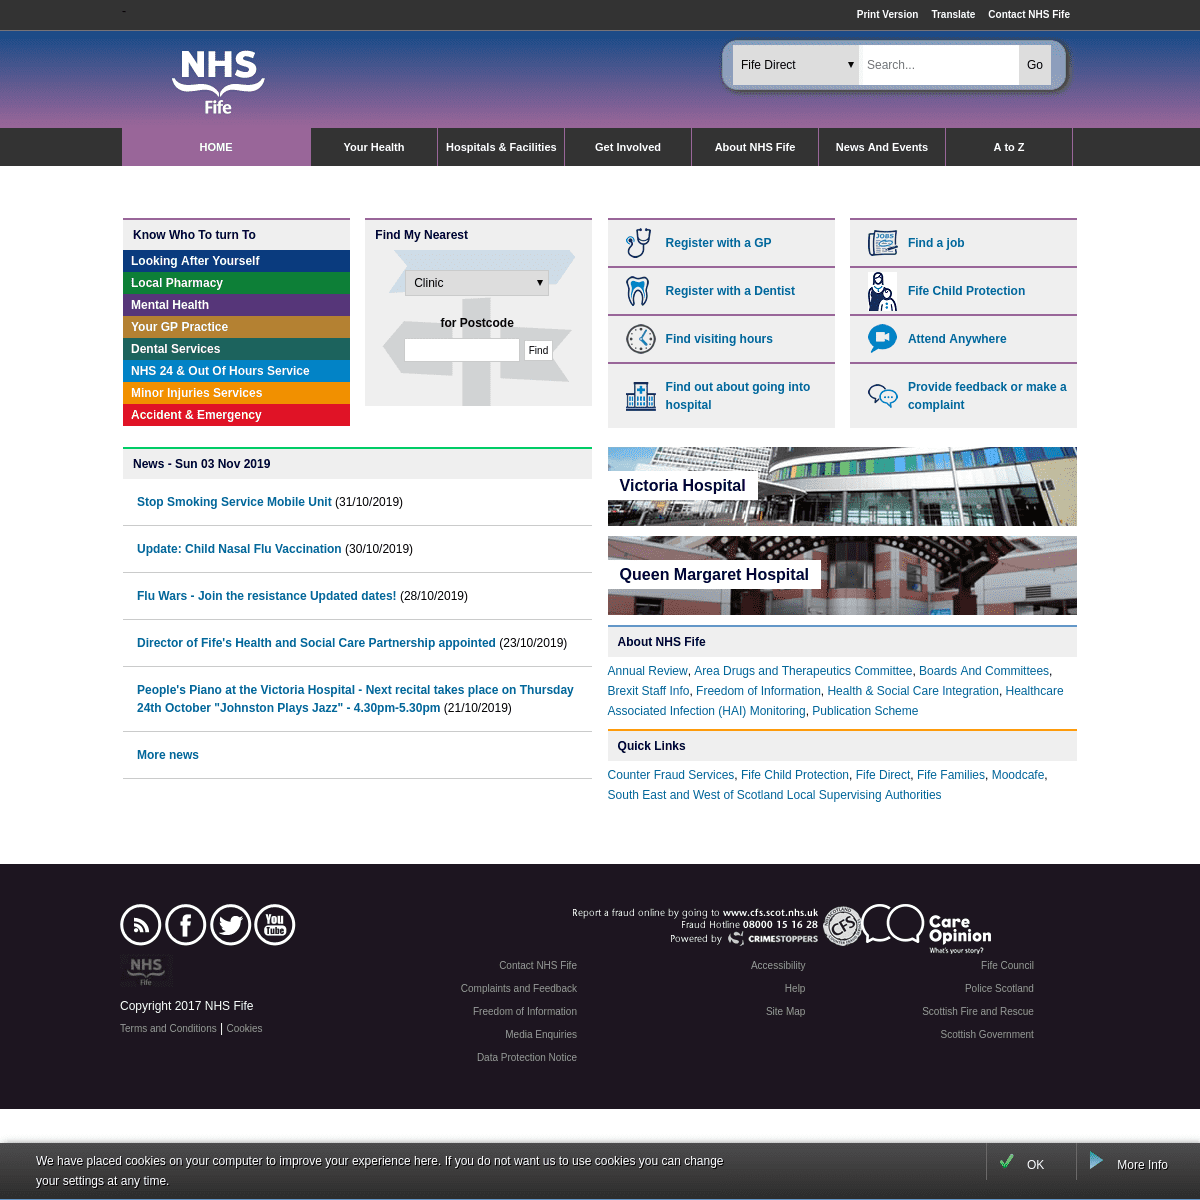 A complete backup of nhsfife.org